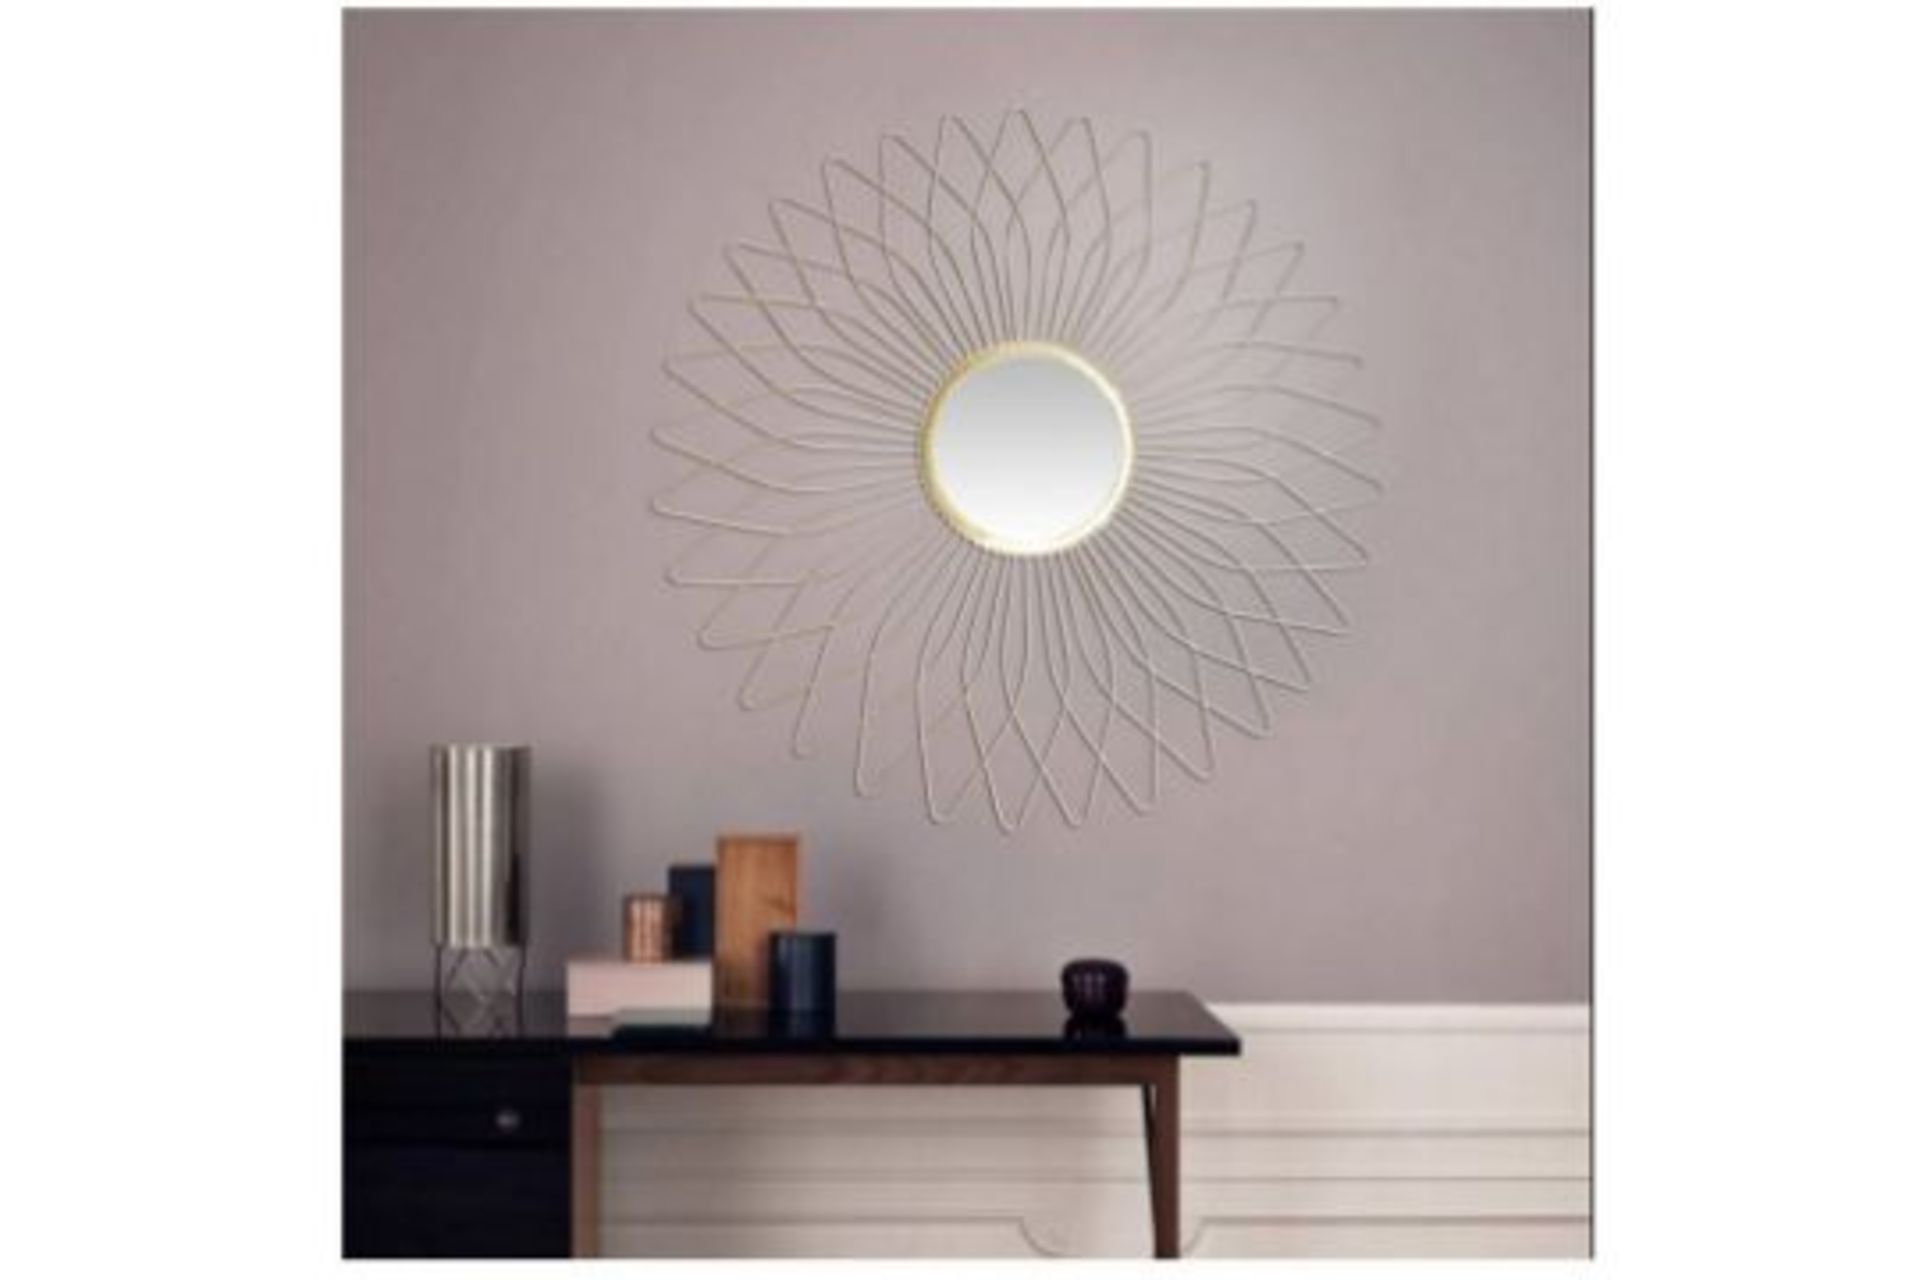 NEW LARGE GOLD ROUND MIRROR (80 x 80cm) - Image 2 of 2